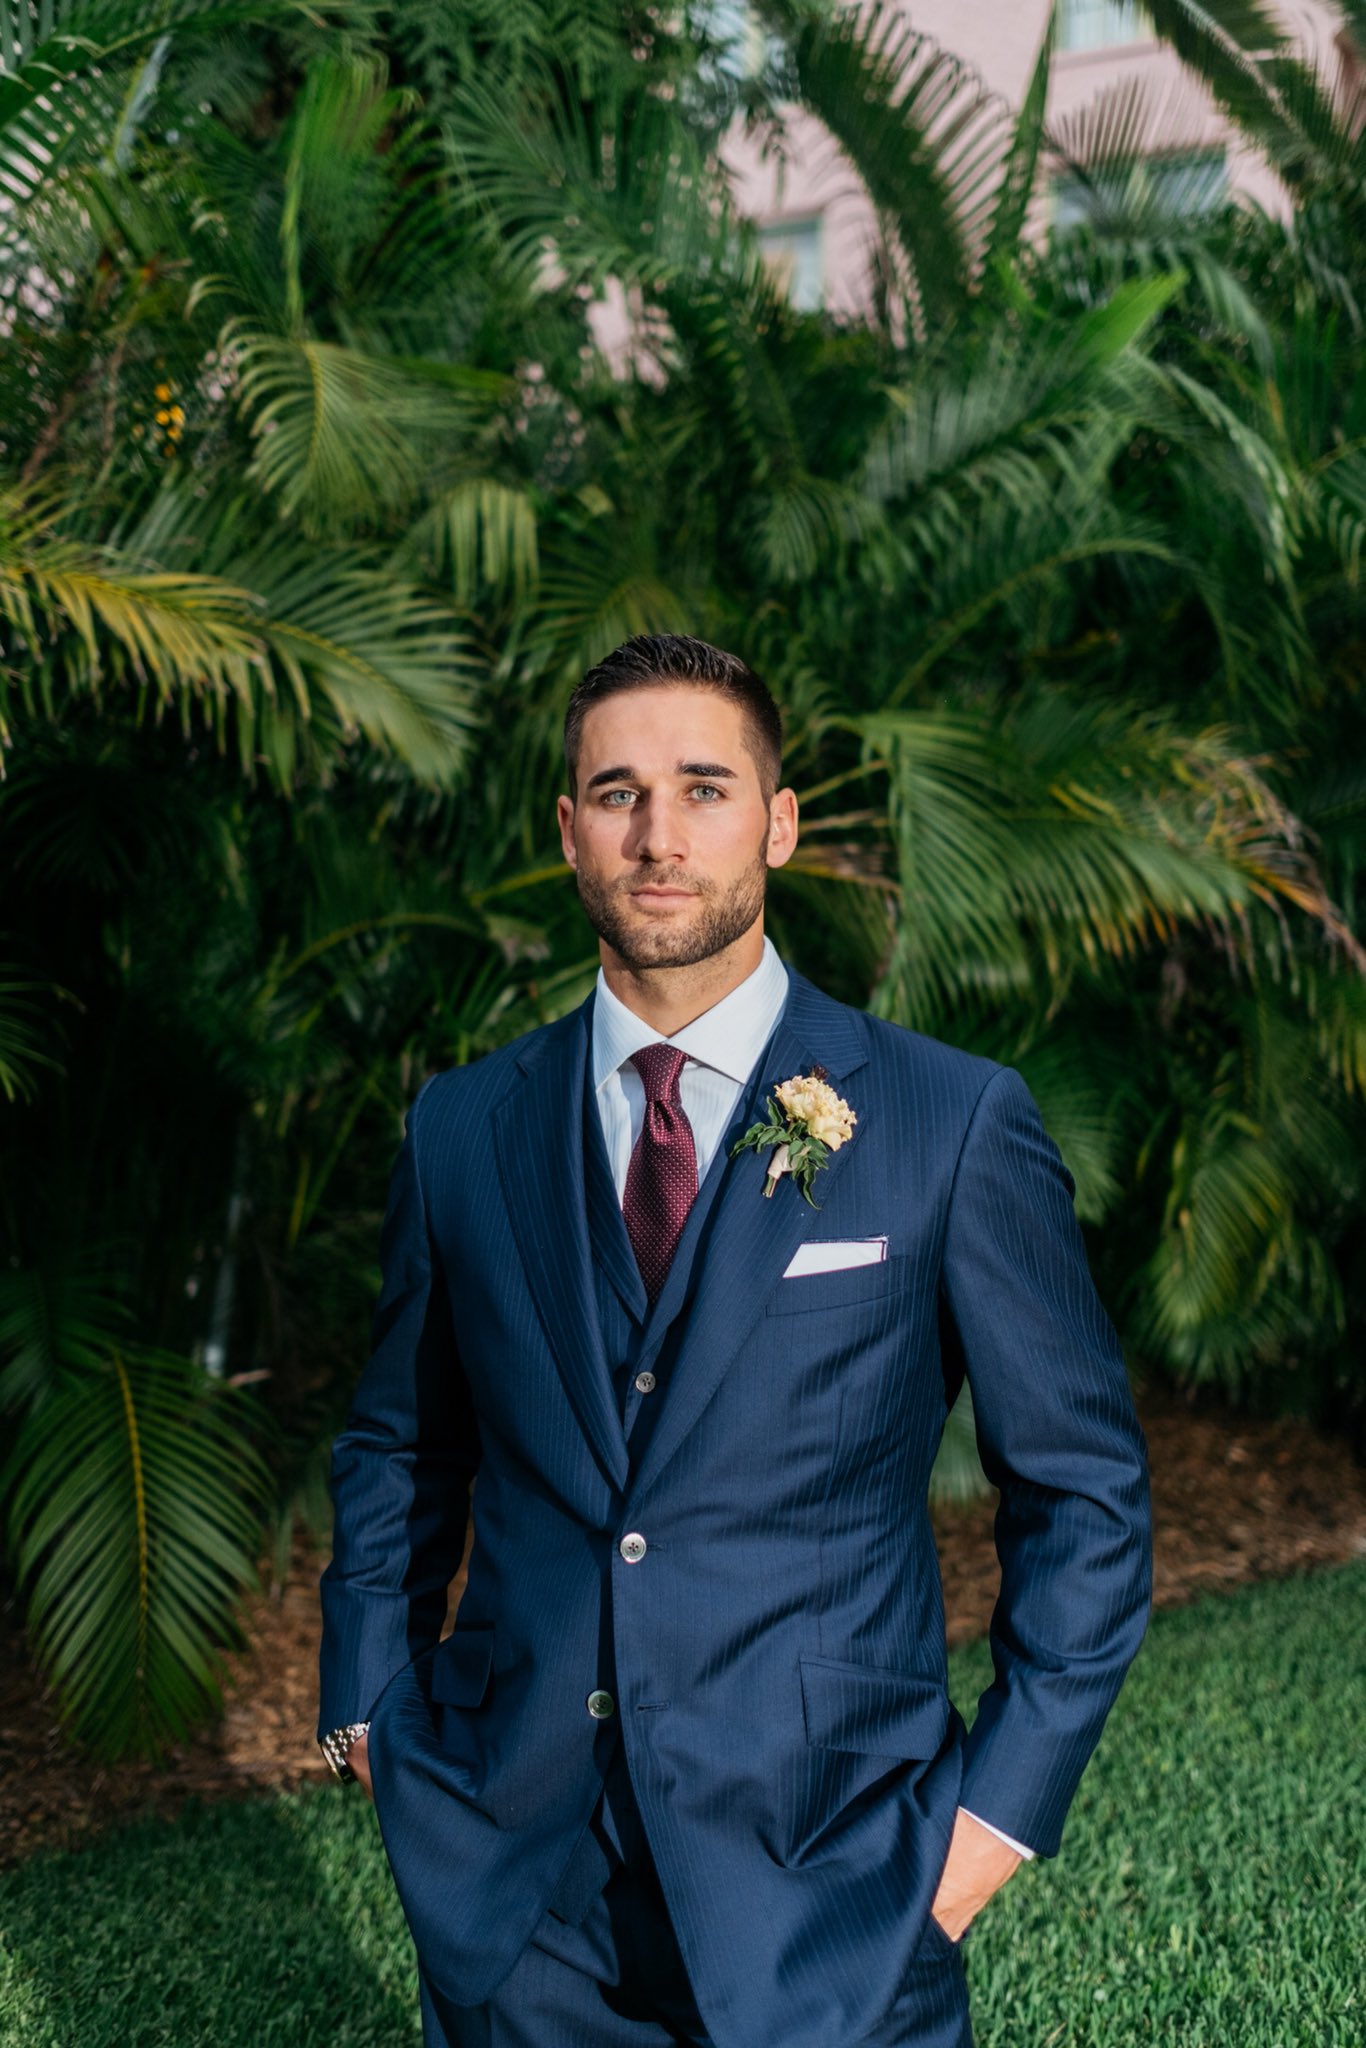 Kevin Kiermaier on X: Its been a quick 3 weeks of marriage so far